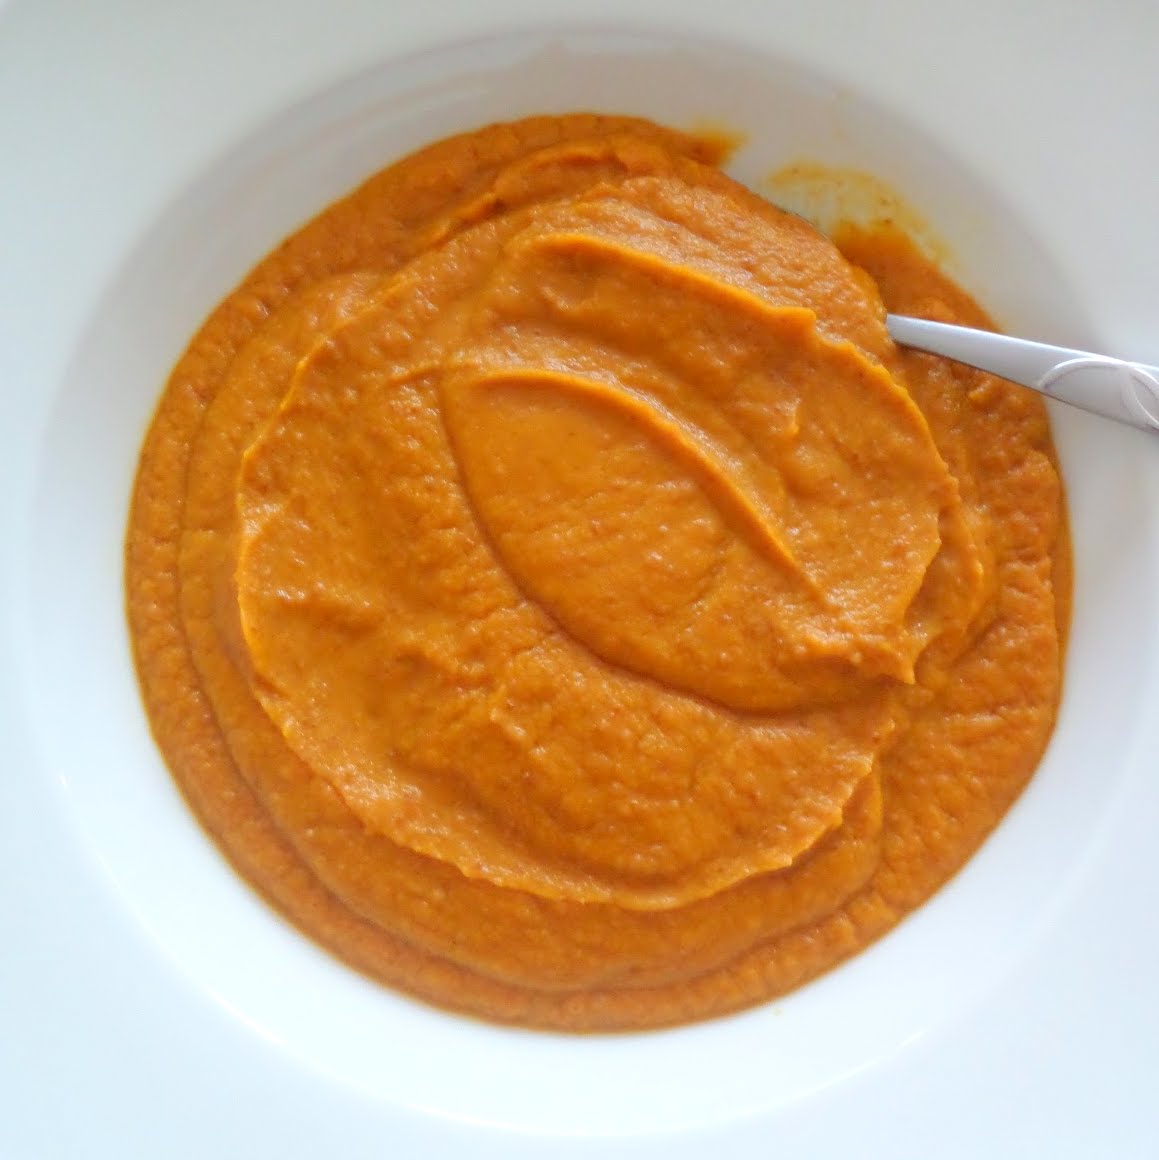 Pureed Carrot Soup:  A creamy, vegan, soup made with pureed carrots, onions, and beans in a vegetable broth with a hint of dill.  It's filling enough for a meal but also great with a small sandwich.